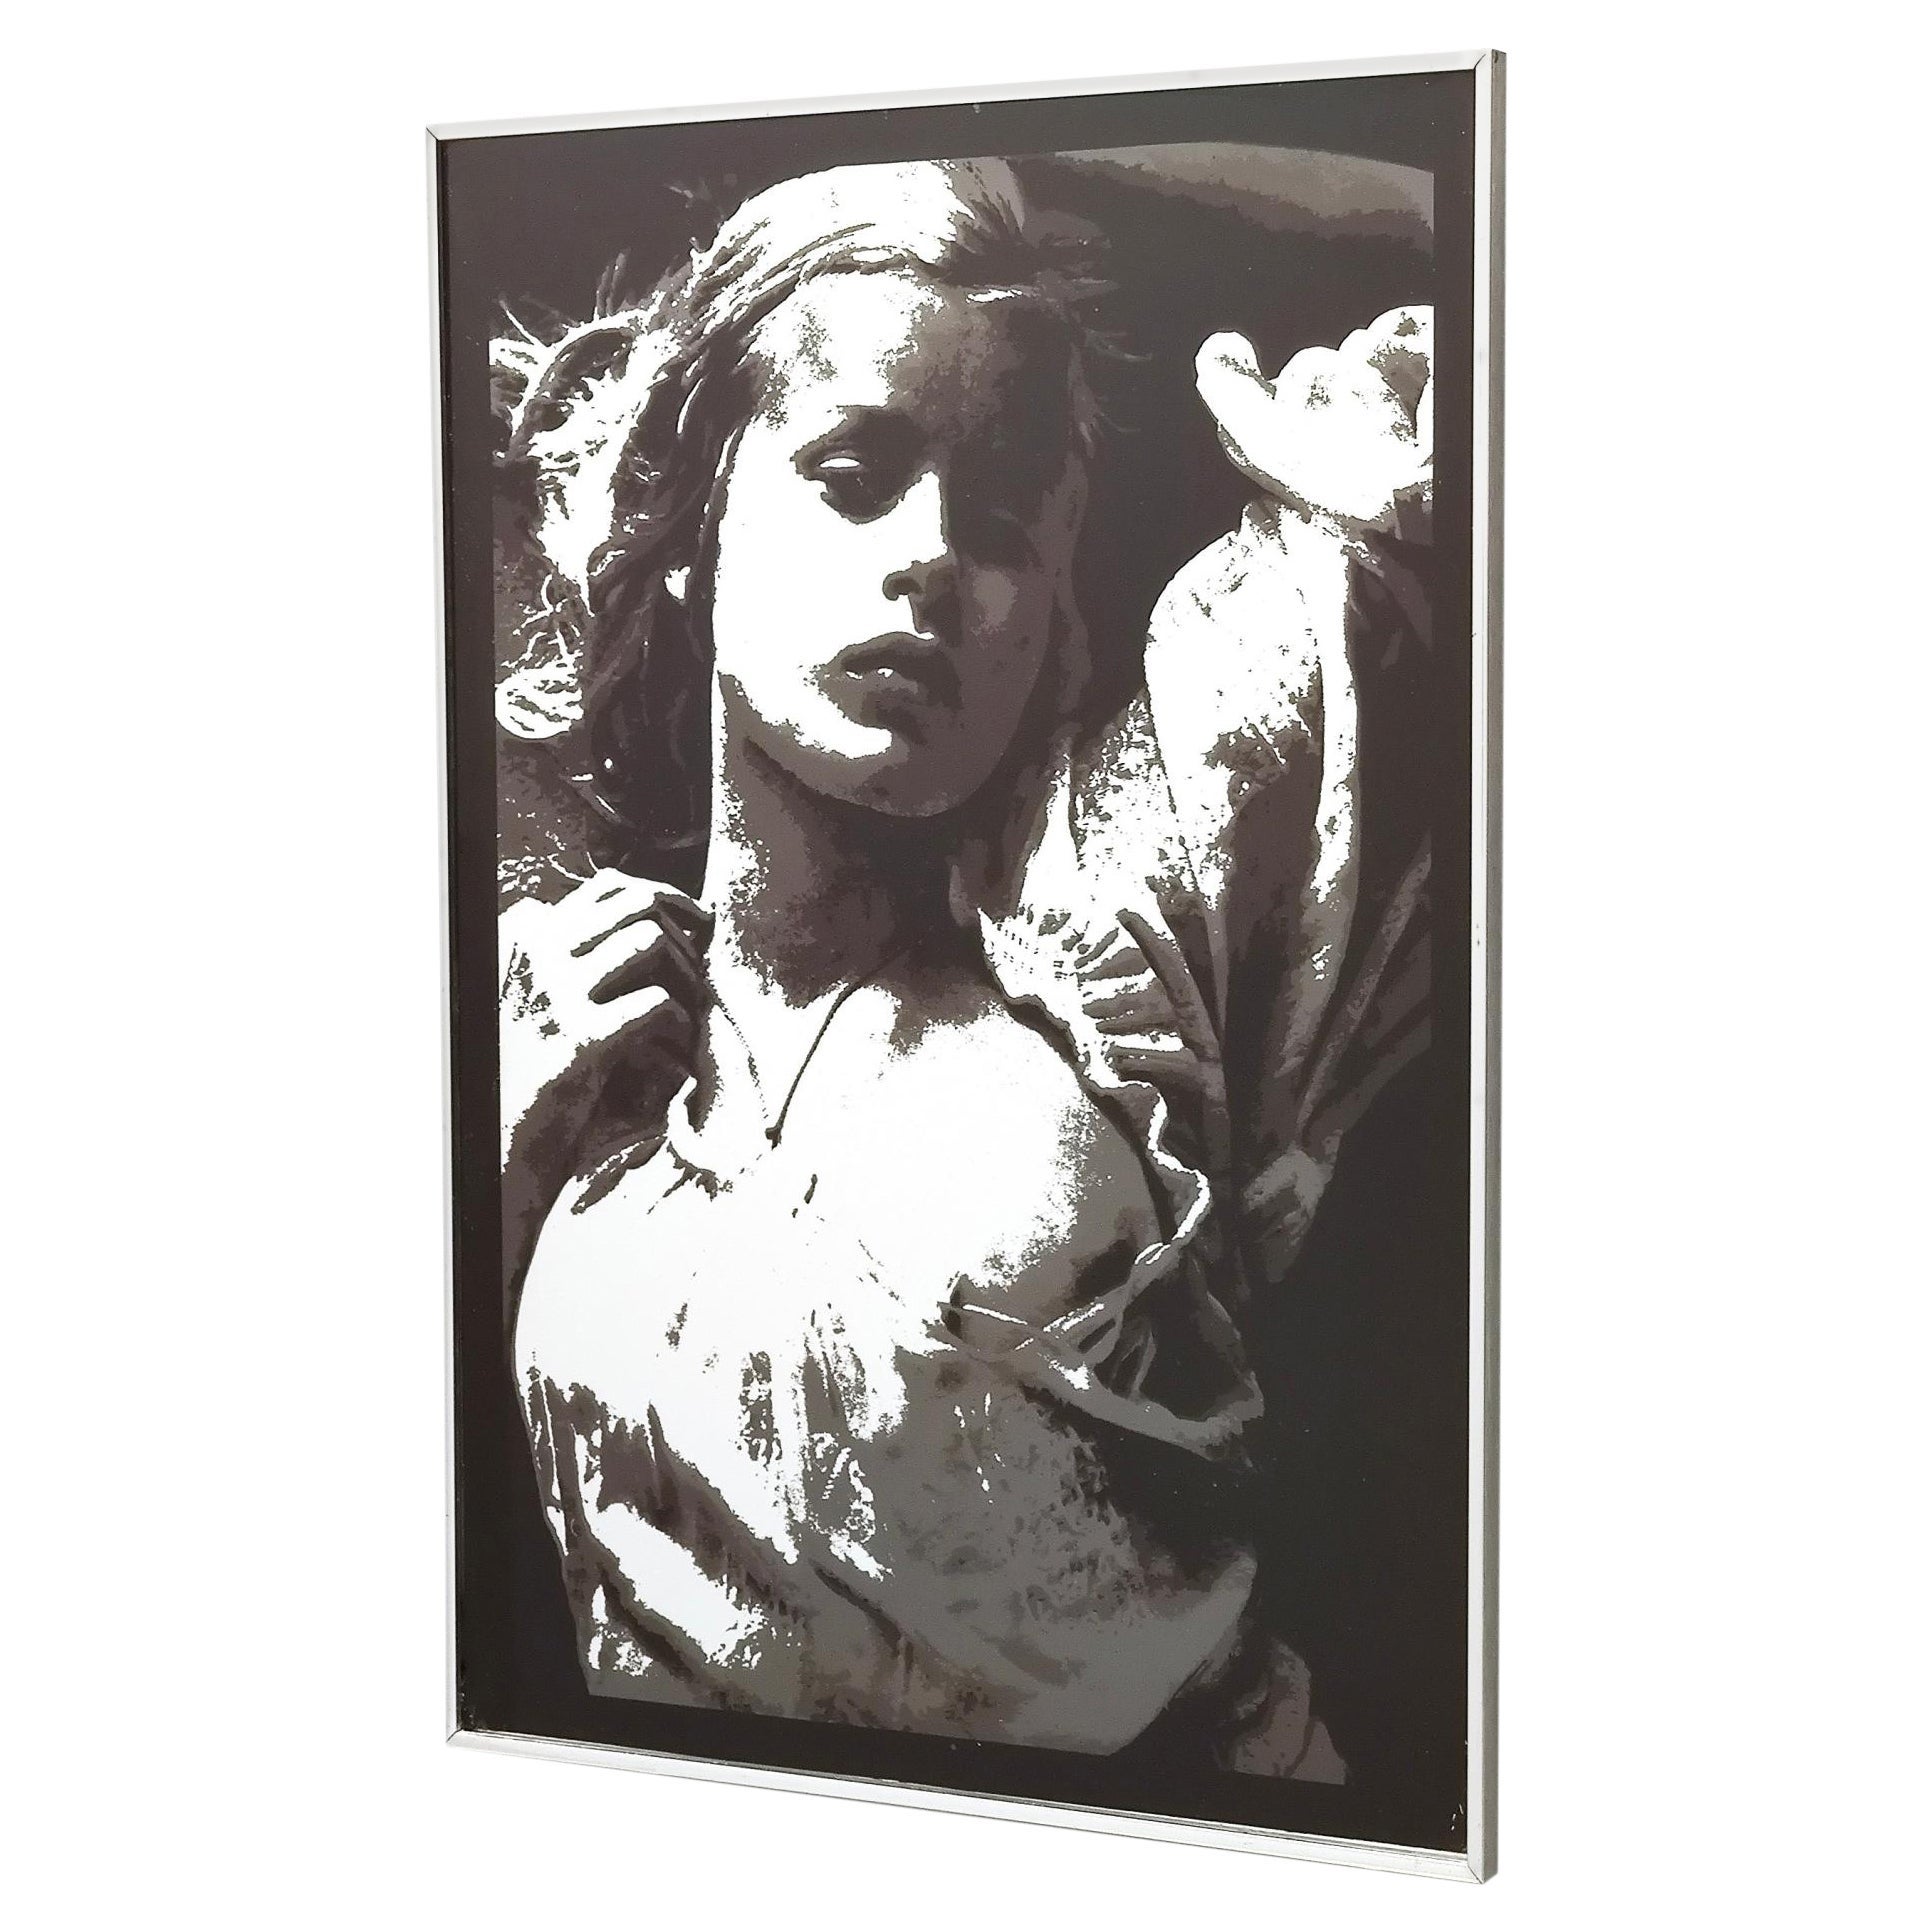 Serigraphy on Rectangular Mirror with a Photo by David Hamilton, 1970s-1980s